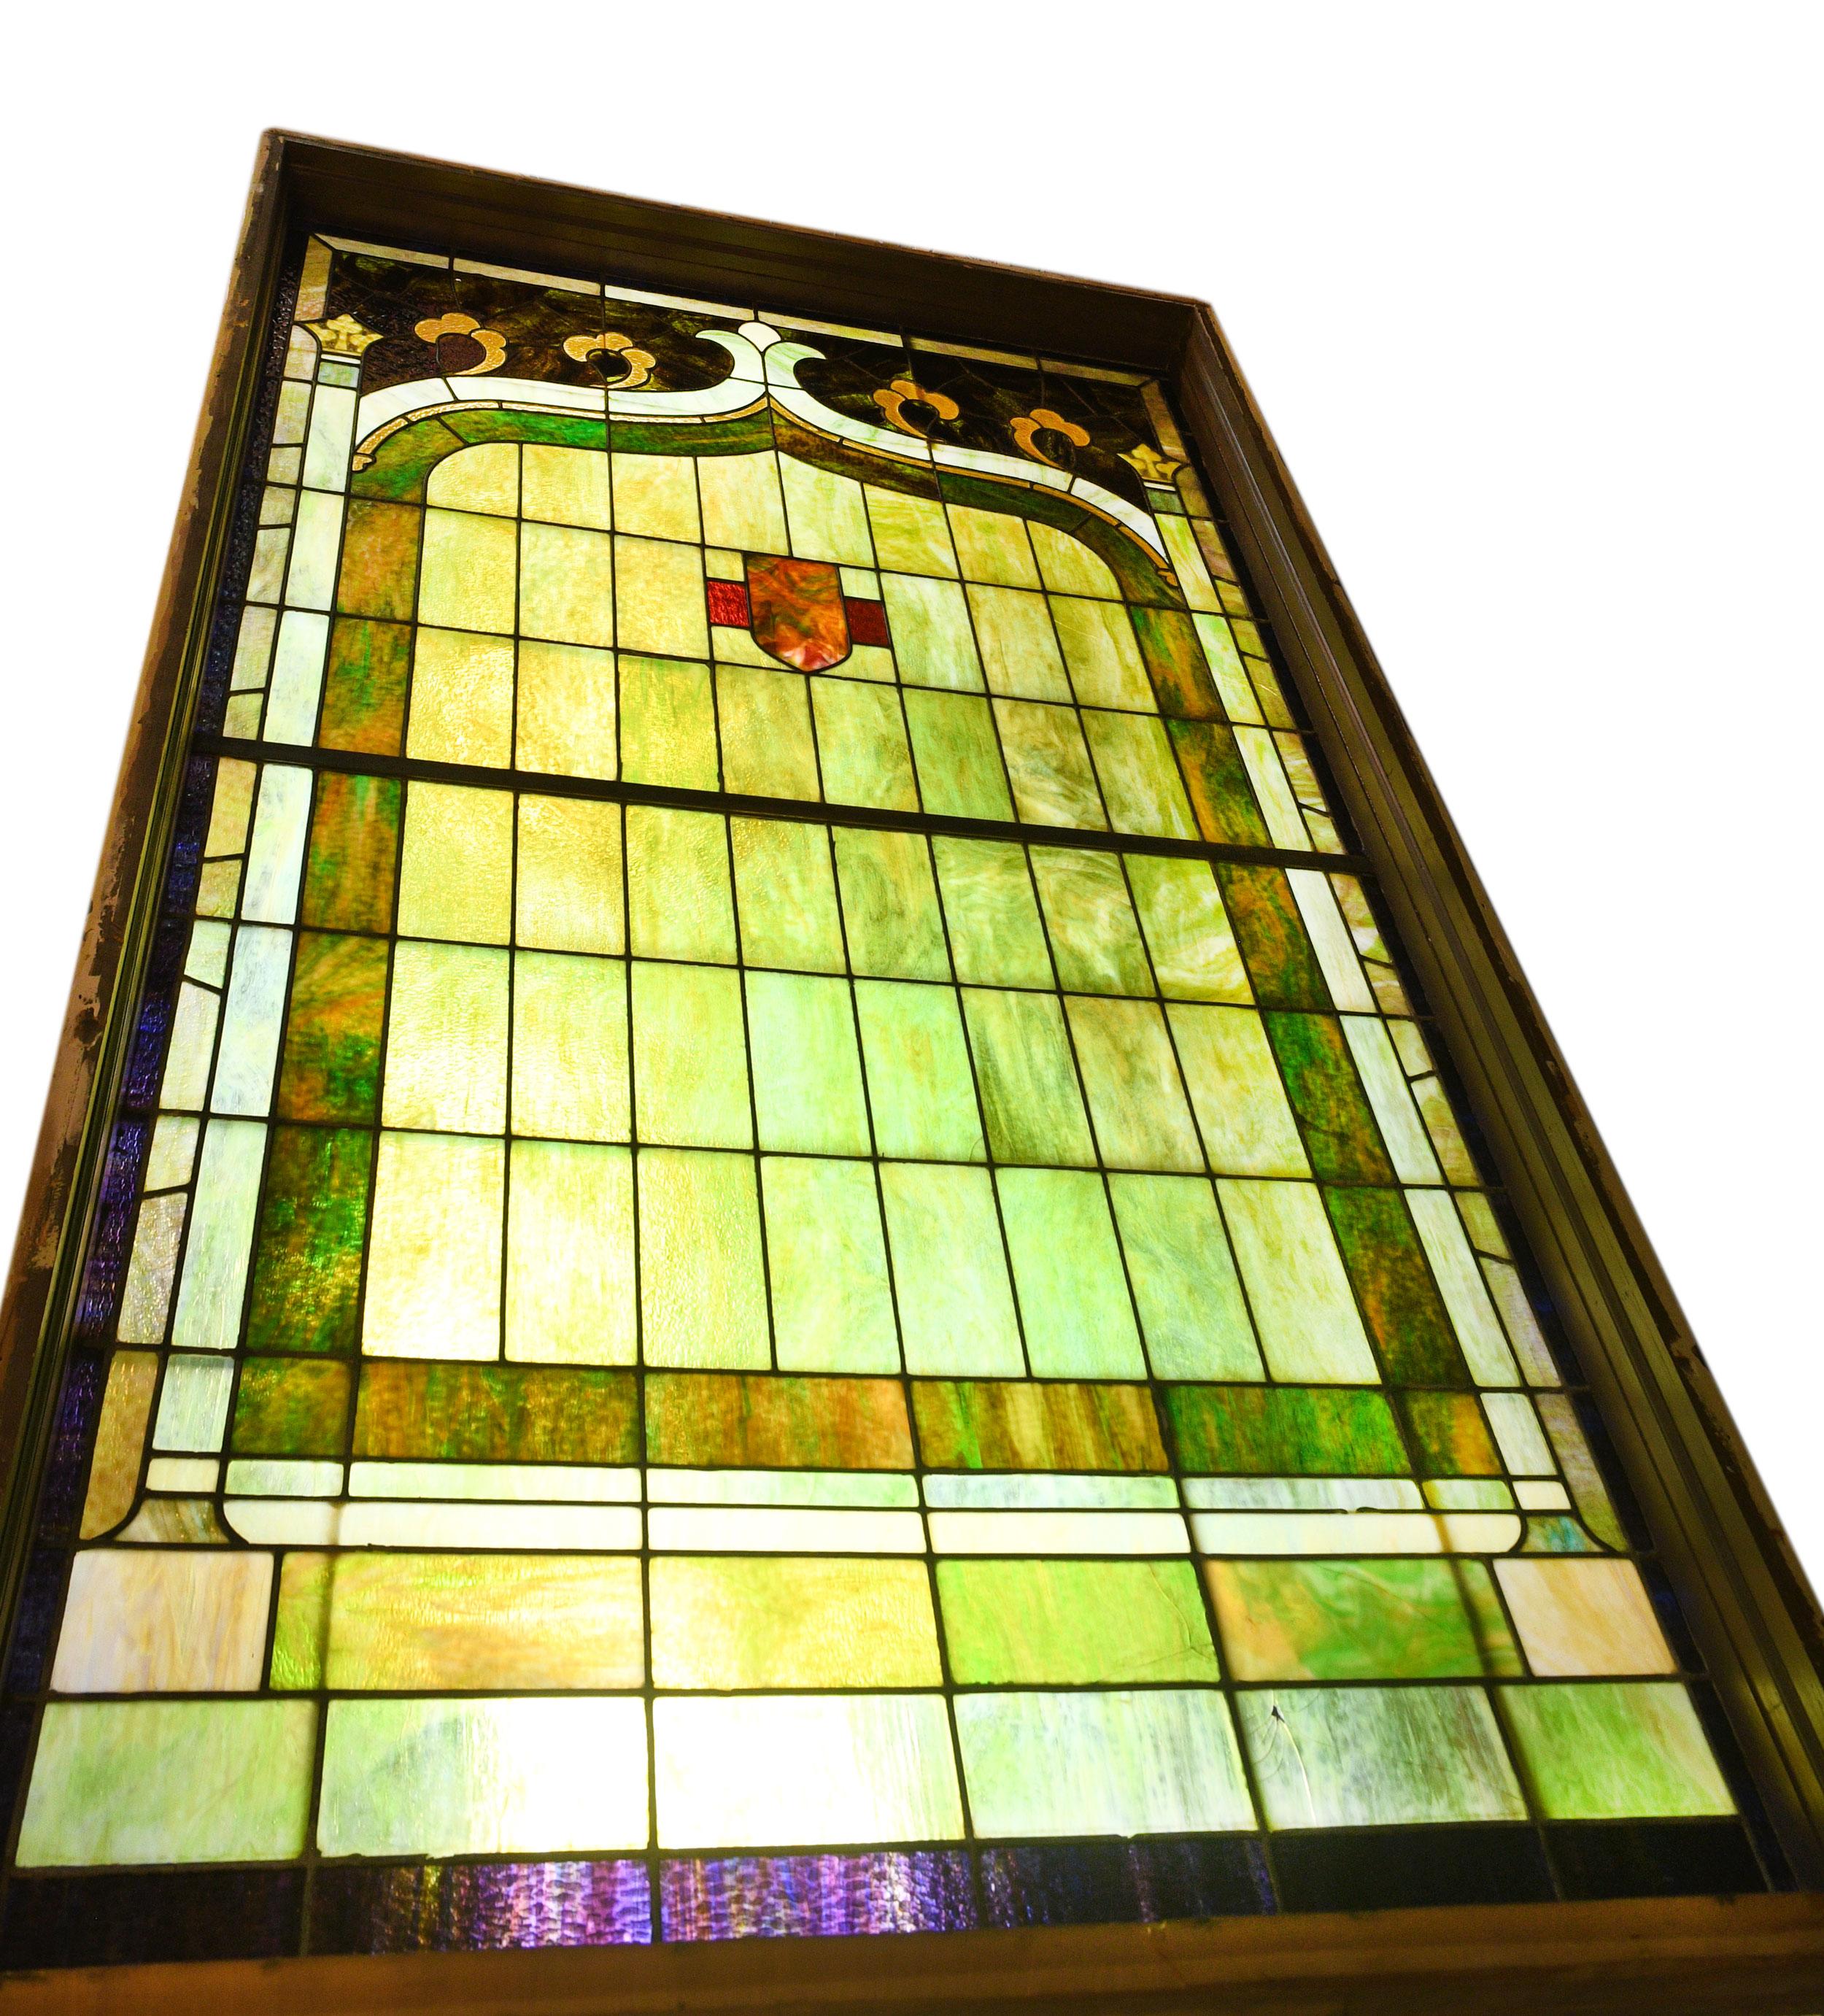 This impressively large stained glass window is made of finely crafted purple and green slag glass and features geometric patterning, floral accents, and a shield design. When illuminated, the slag glass gives off a stunningly warm glow!